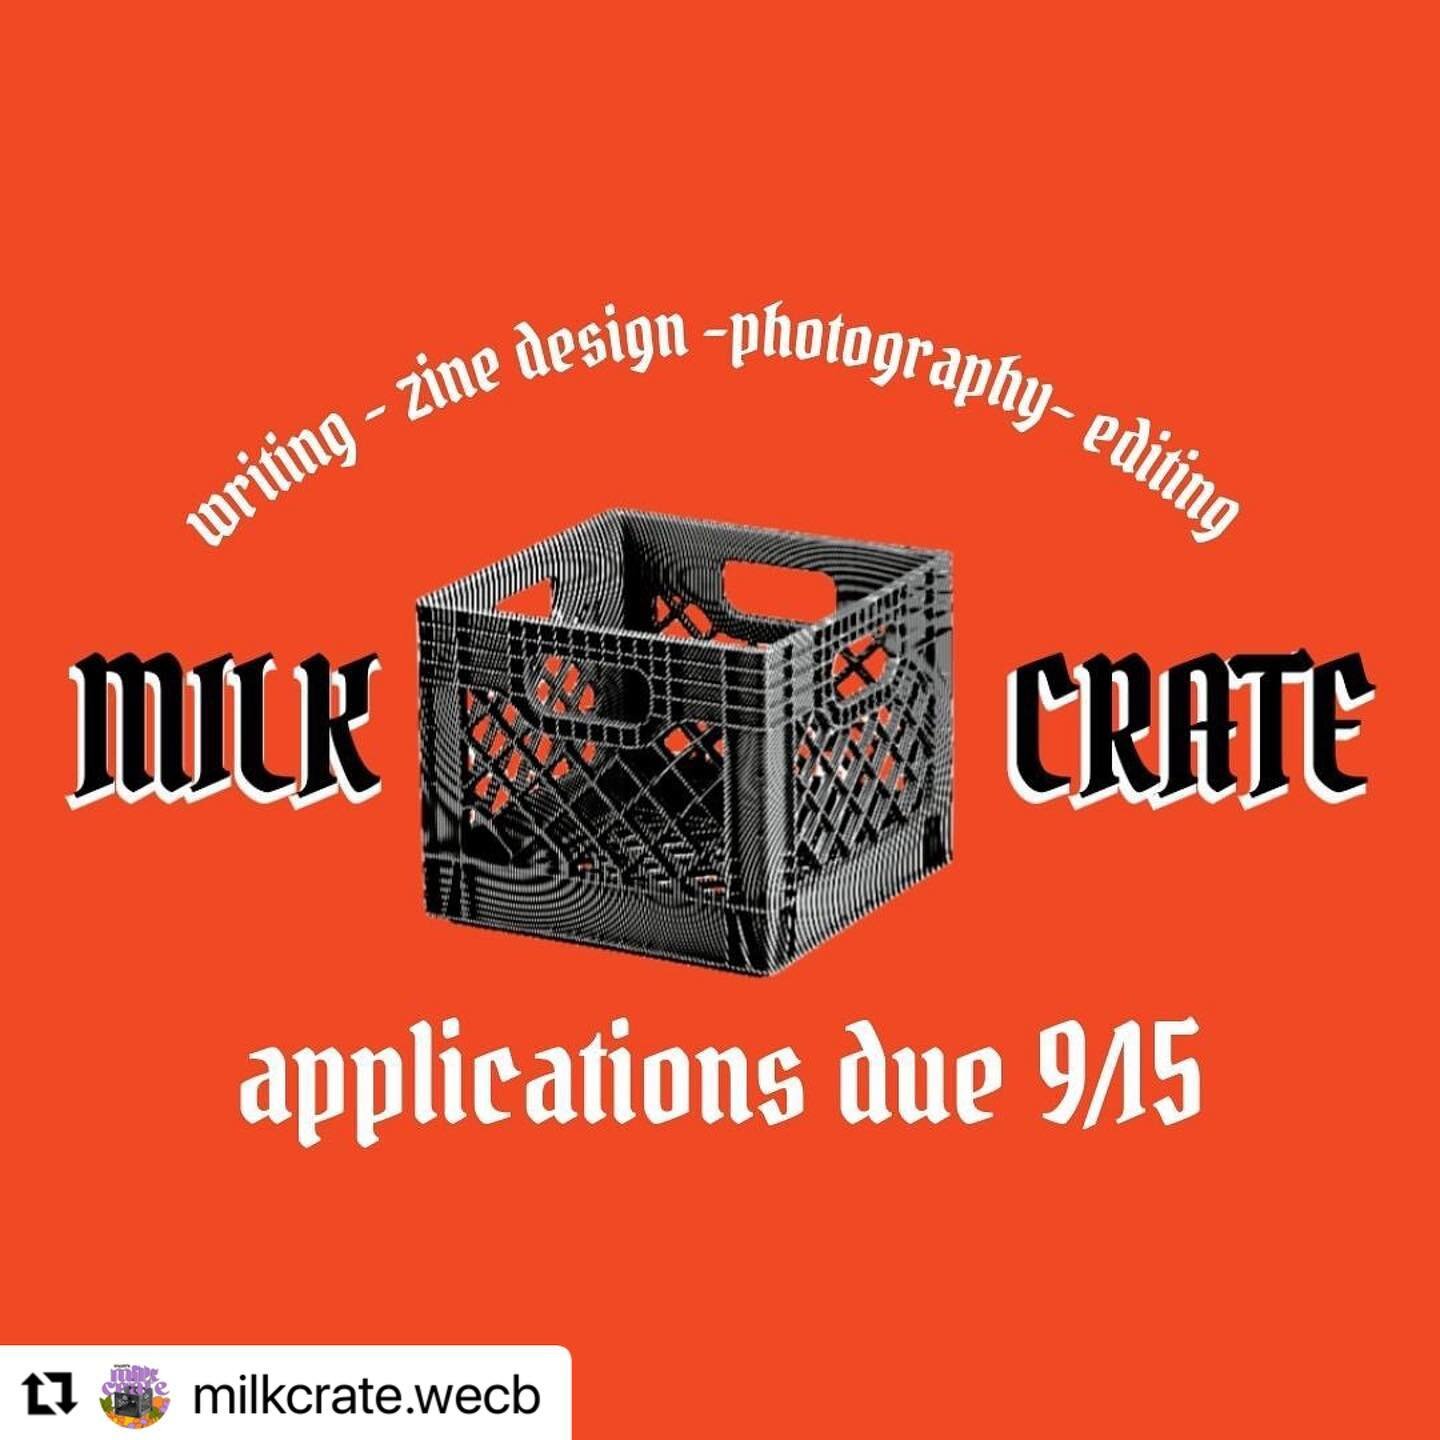 #Repost @milkcrate.wecb 
・・・
thanks for everyone who came out to our @www.wecb.fm booth at org fair, so lovely to see everyone in person! applications to join the milk crate team are due wednesday the 15th, you can find the form at the link in our bio! in addition to contributors who write and/or photograph anything in the realm of music, we are also looking for people to help us run social media, design our zine, edit our pieces (this is mostly for our lovely returnees) and participate in our submissions team! if you&rsquo;re curious about what sorts of things you can write about for us, we have a highlight with some examples, or just check out our blog to see what we publish. so excited for this semester, can&rsquo;t wait to see who joins the team!